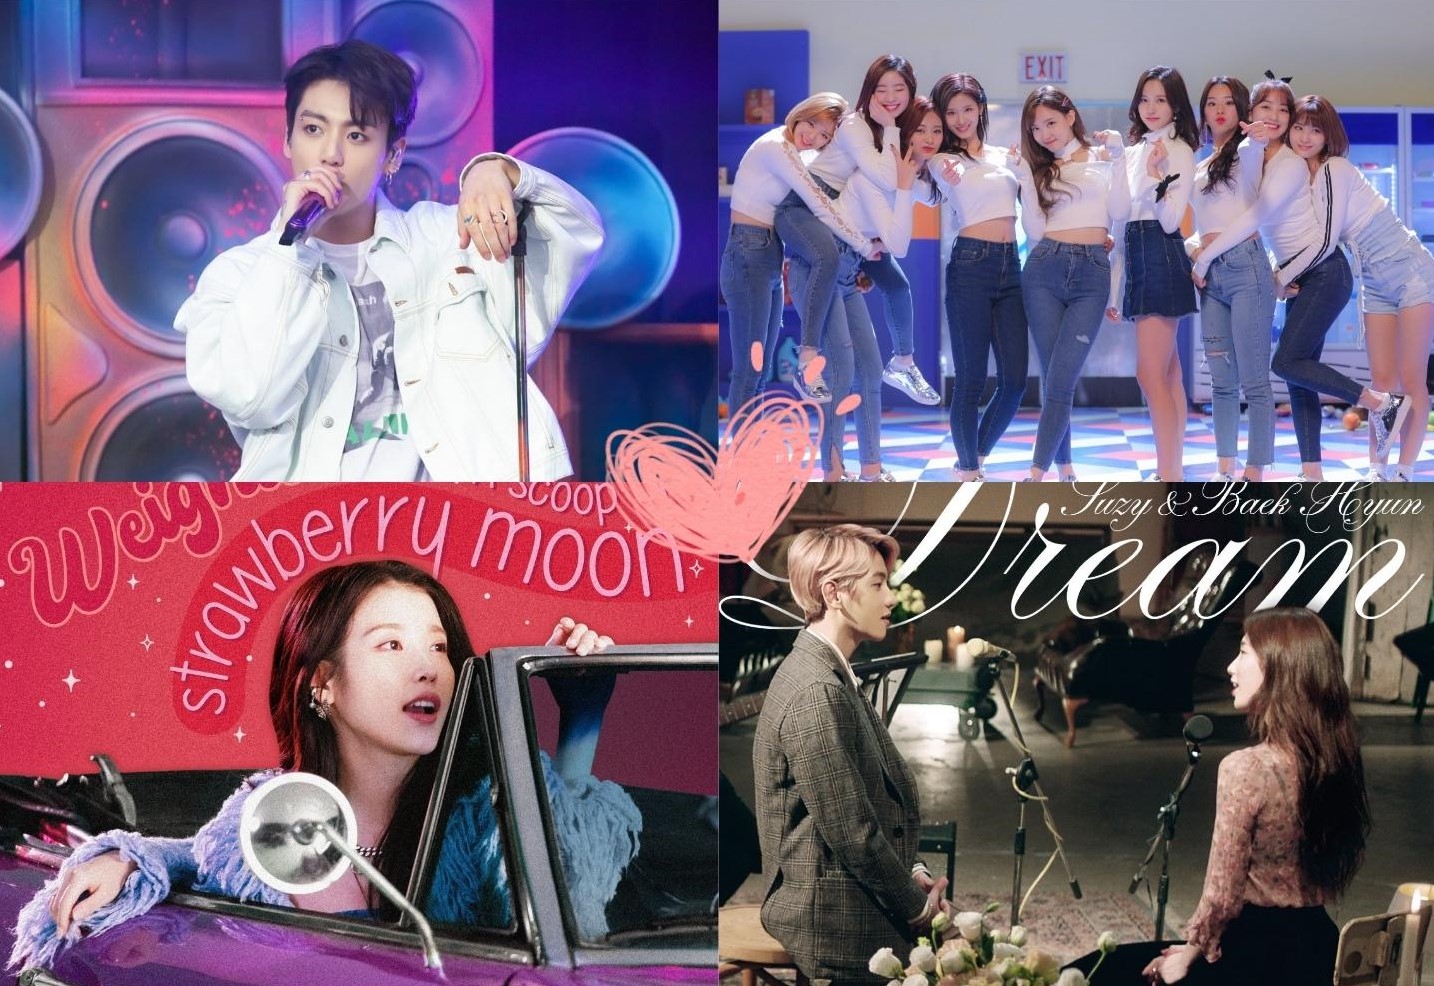 These 12 K-pop love songs are perfect for Valentine’s Day: “Euphoria”, “Heart Shaker” and more!